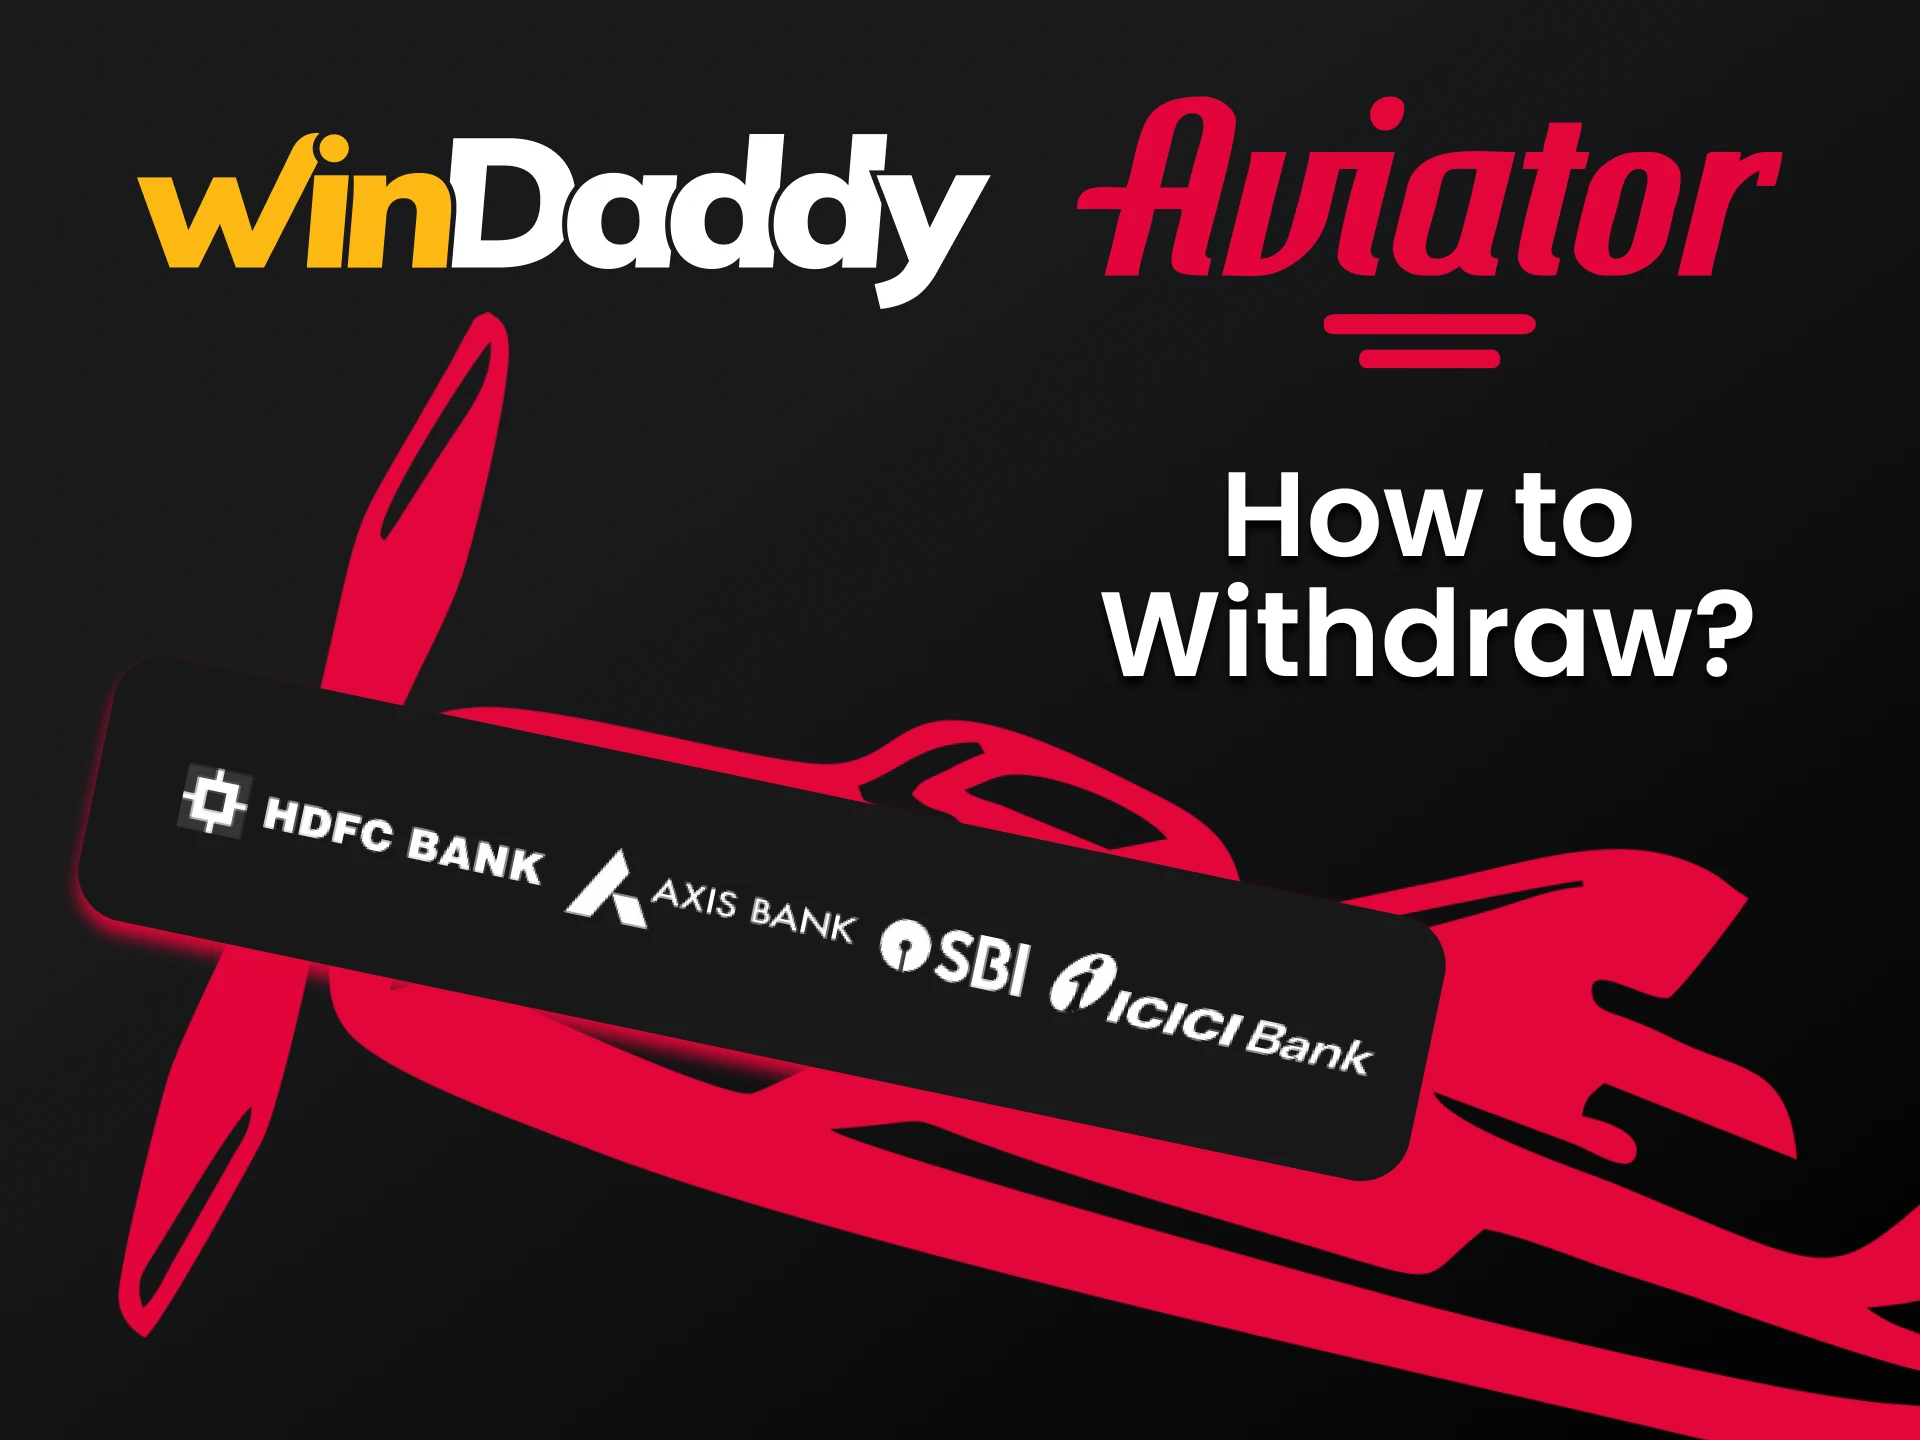 Find out how you can withdraw funds to WinDaddy.